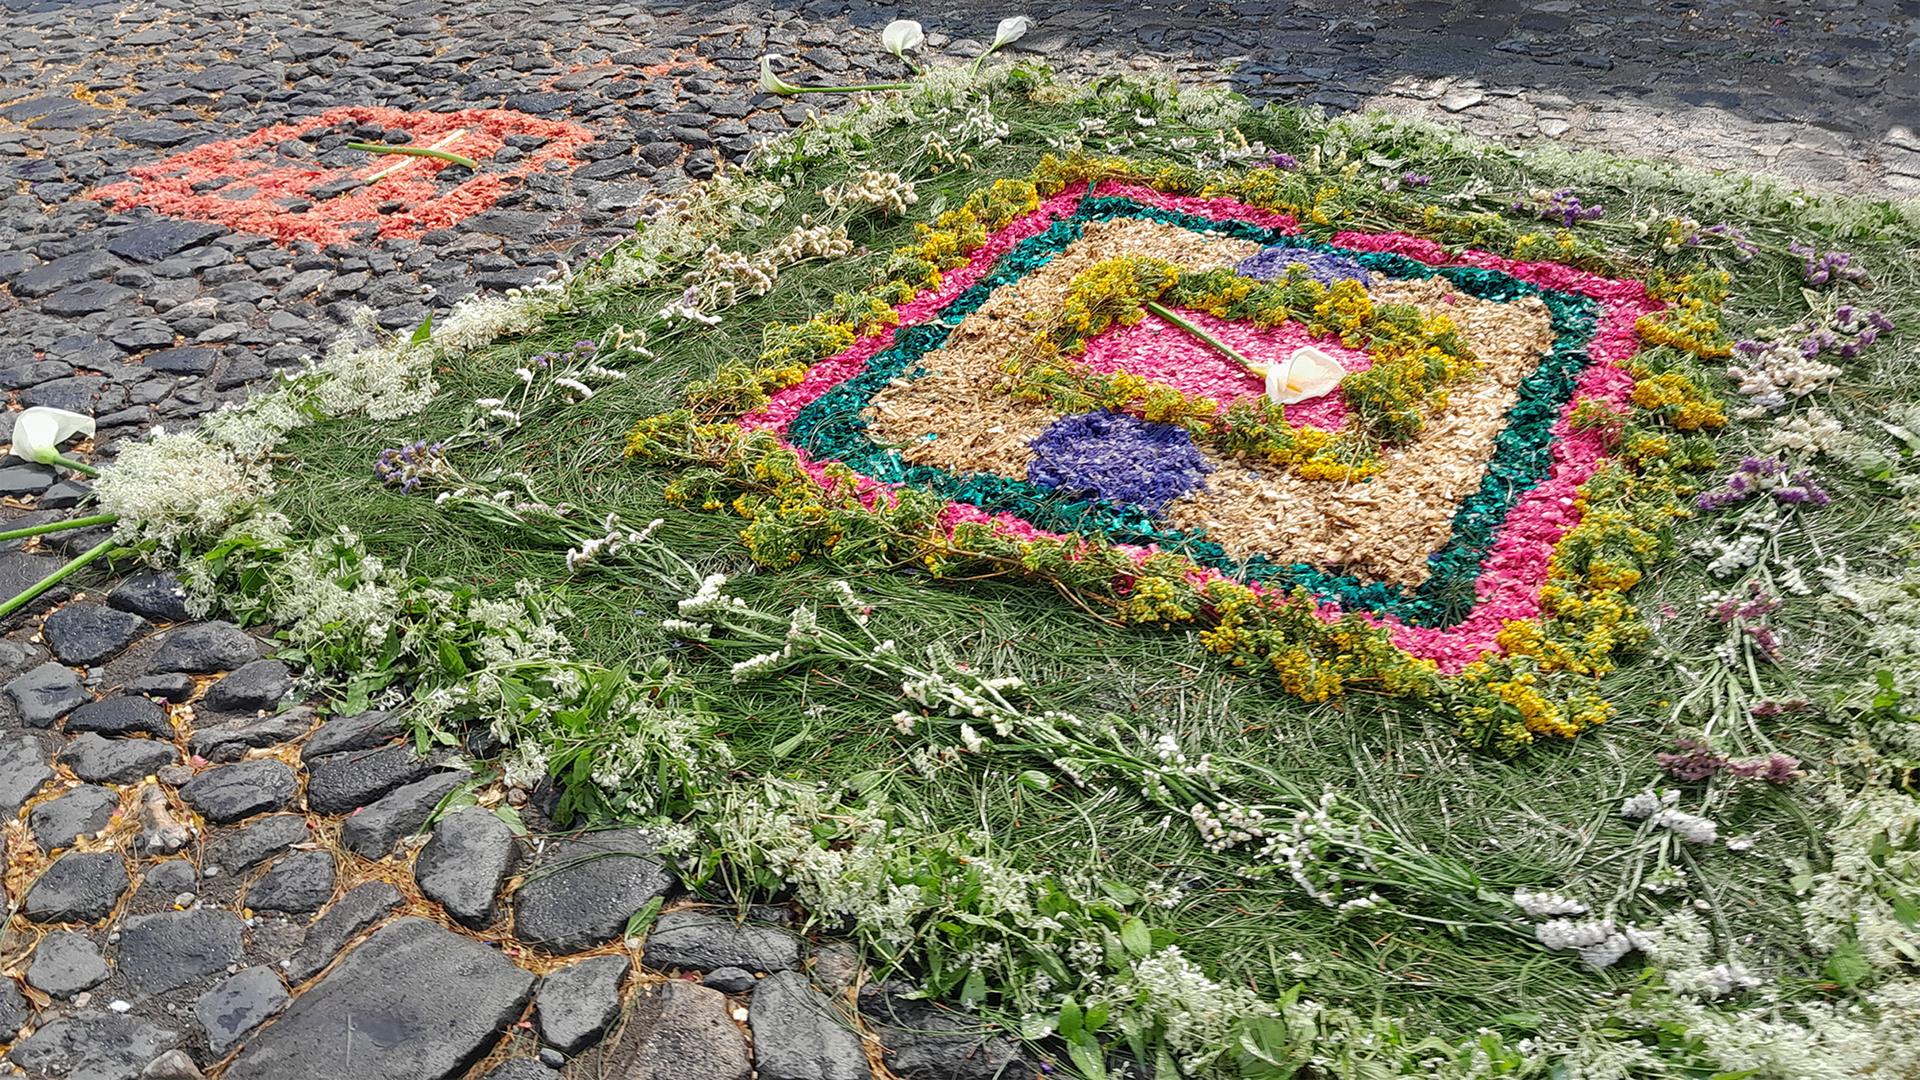 A decorated street carpet known as an alfombra created for Holy Week in Antigua, Guatemala.